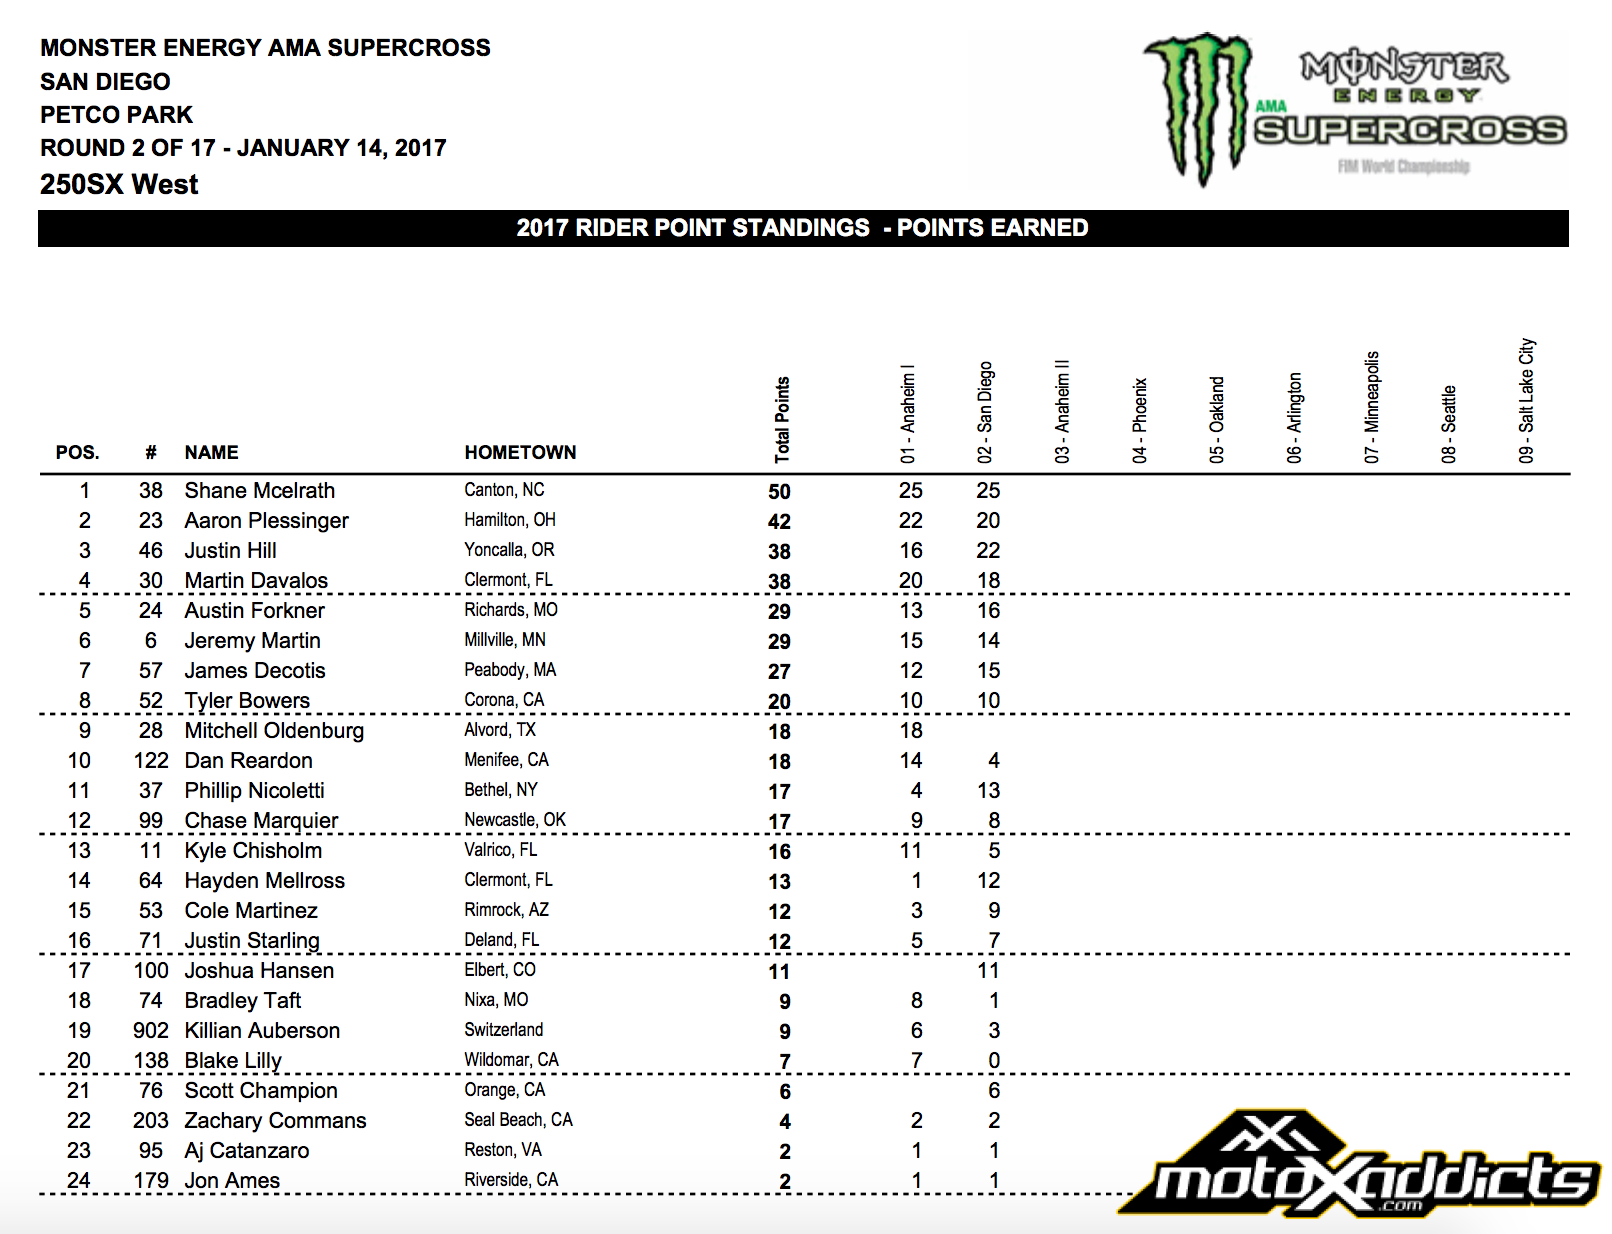 2017 250SX Western Championship Points Standings - After Round 2 - Click to Enlarge